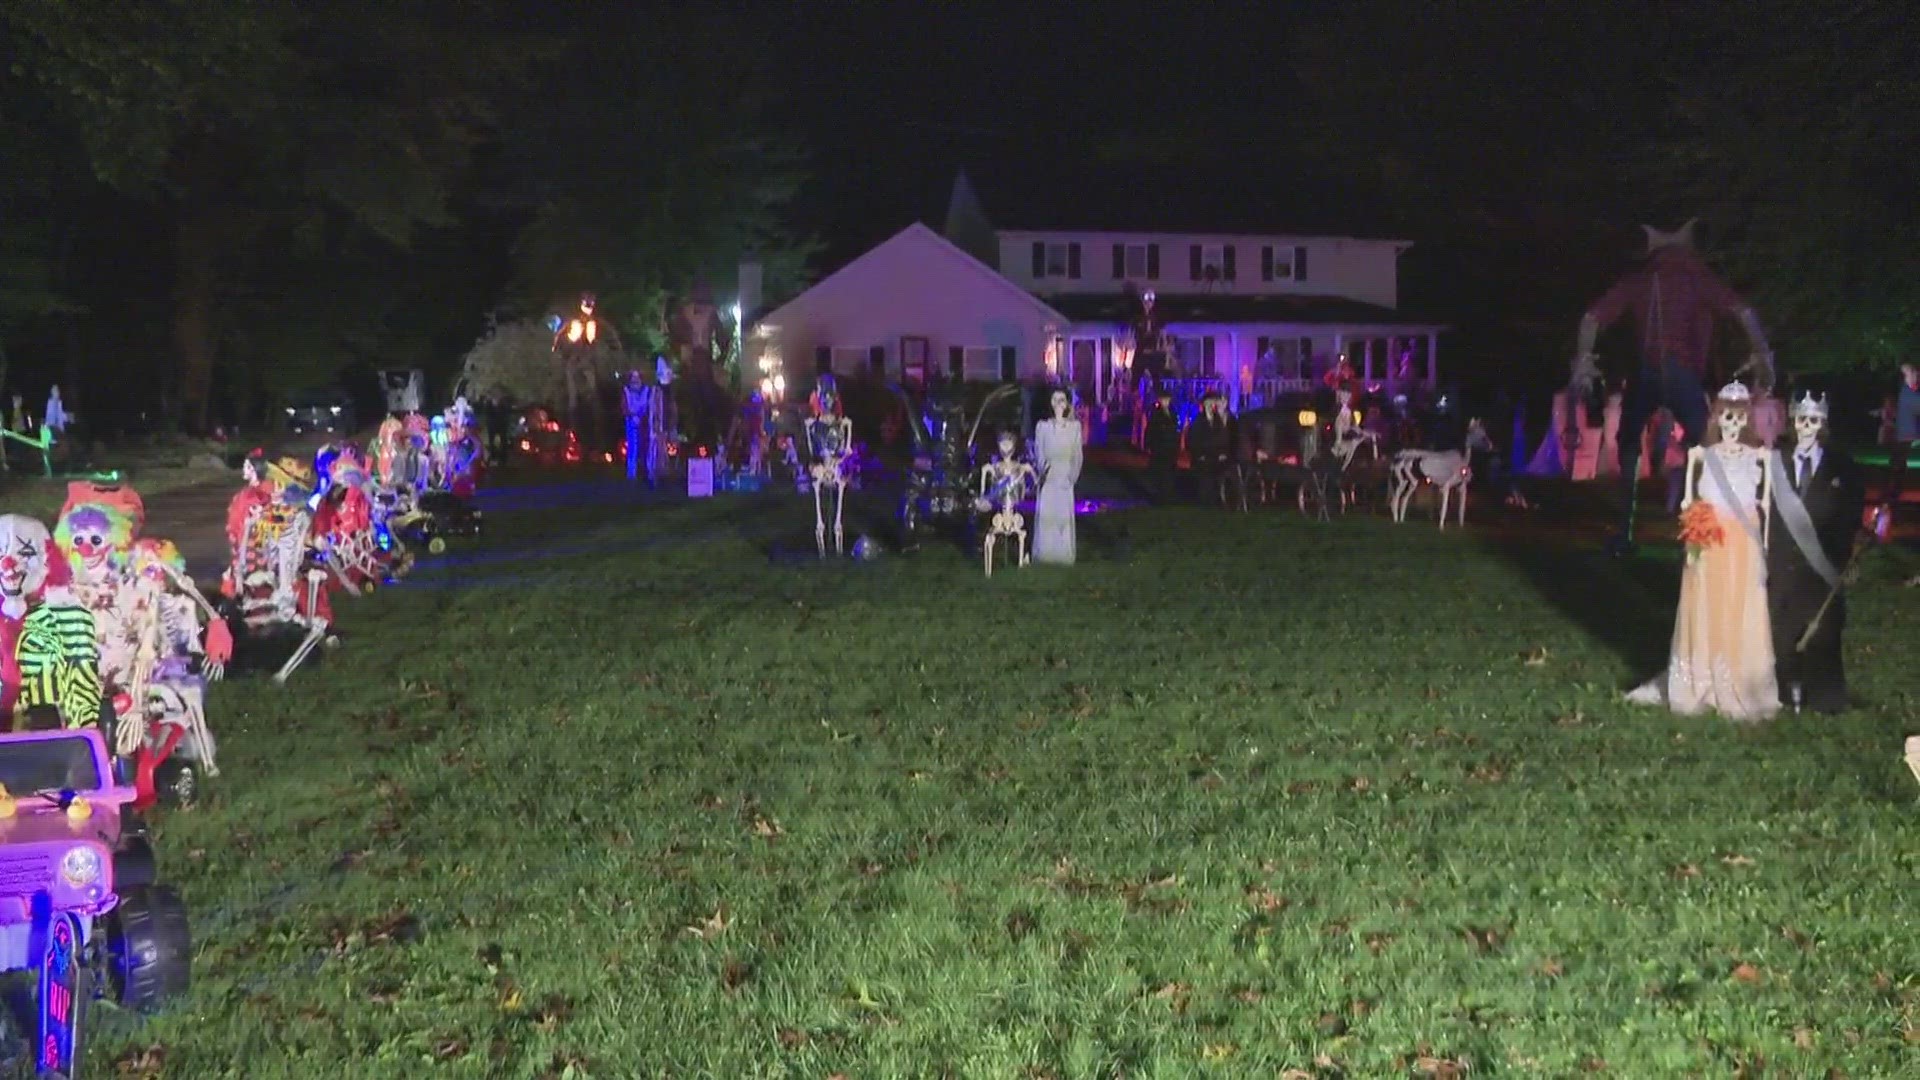 Check out these awesome Halloween decorations in Elyria.